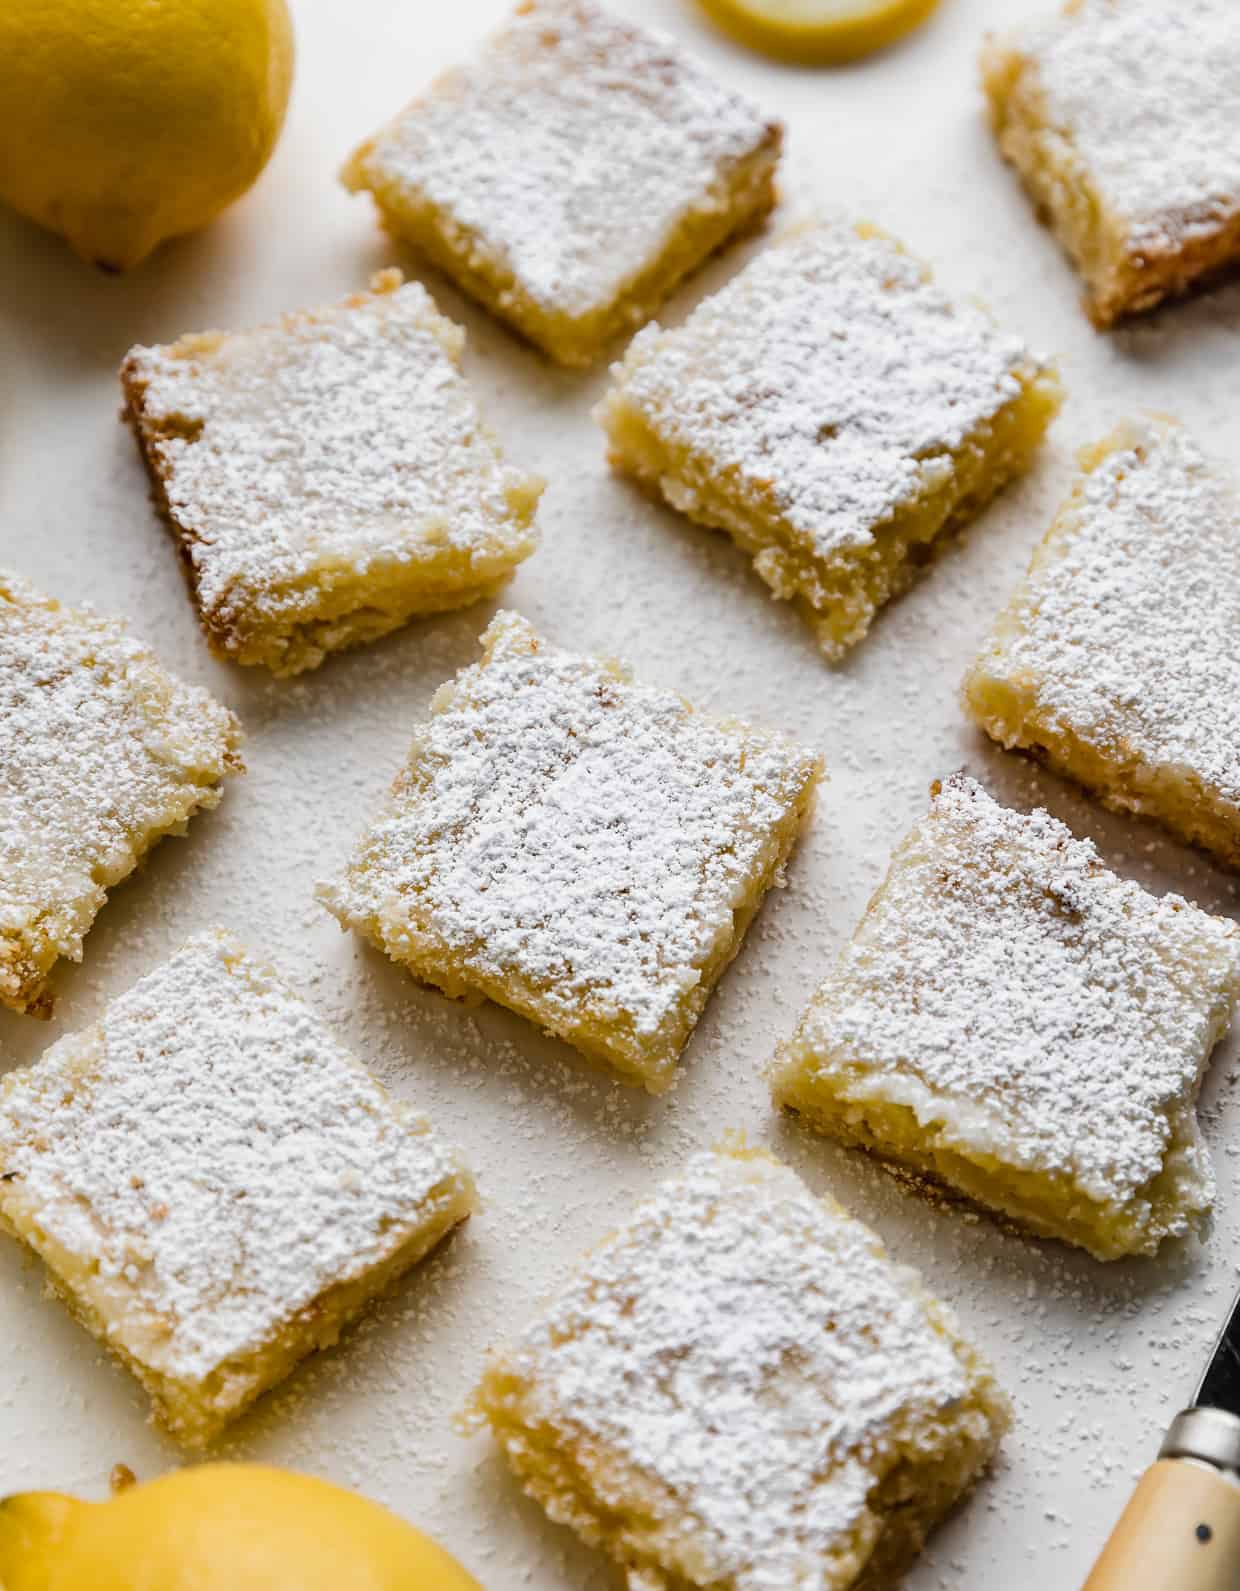 Lemon squares topped with powdered sugar and a glaze, on a white background.